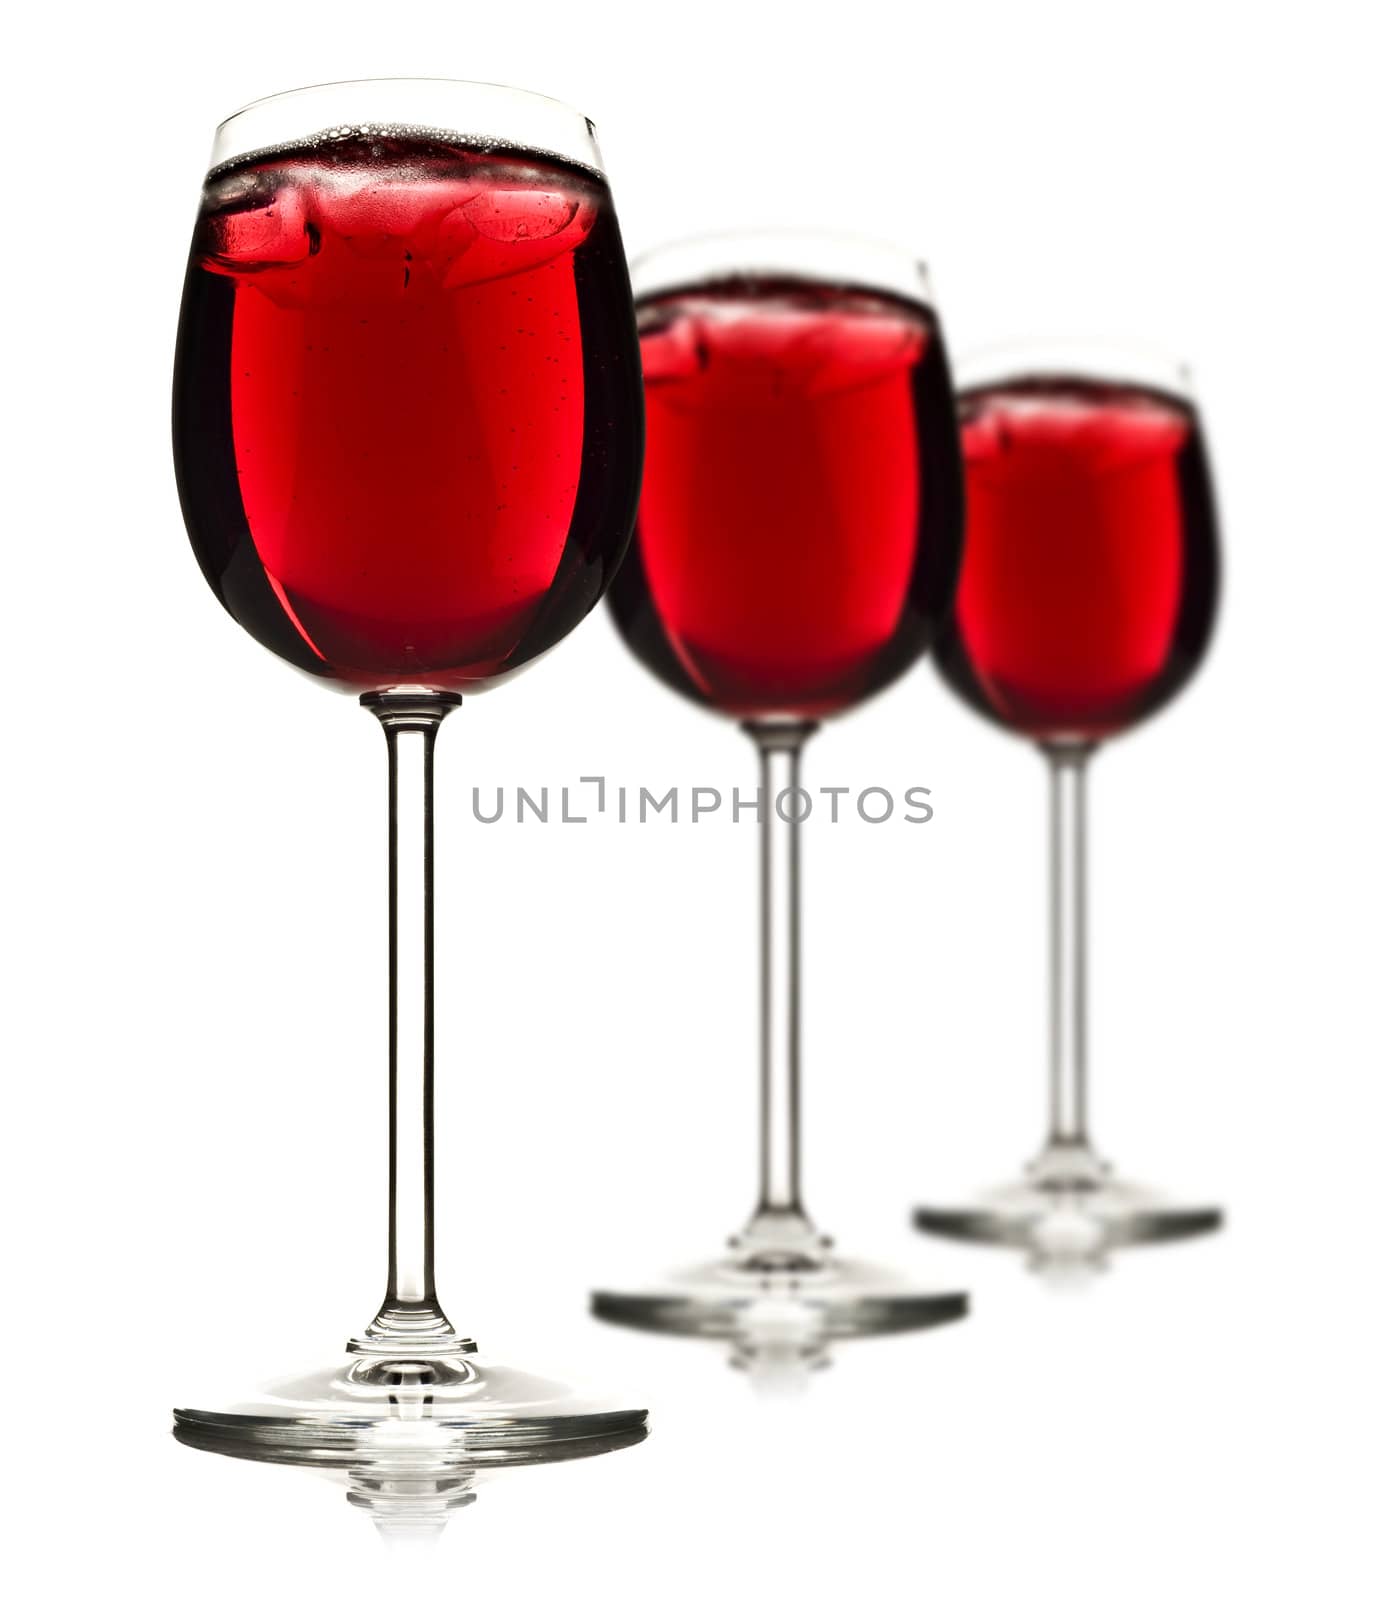 Three wine glasses with red fruit juice and ice with shallow depth of field